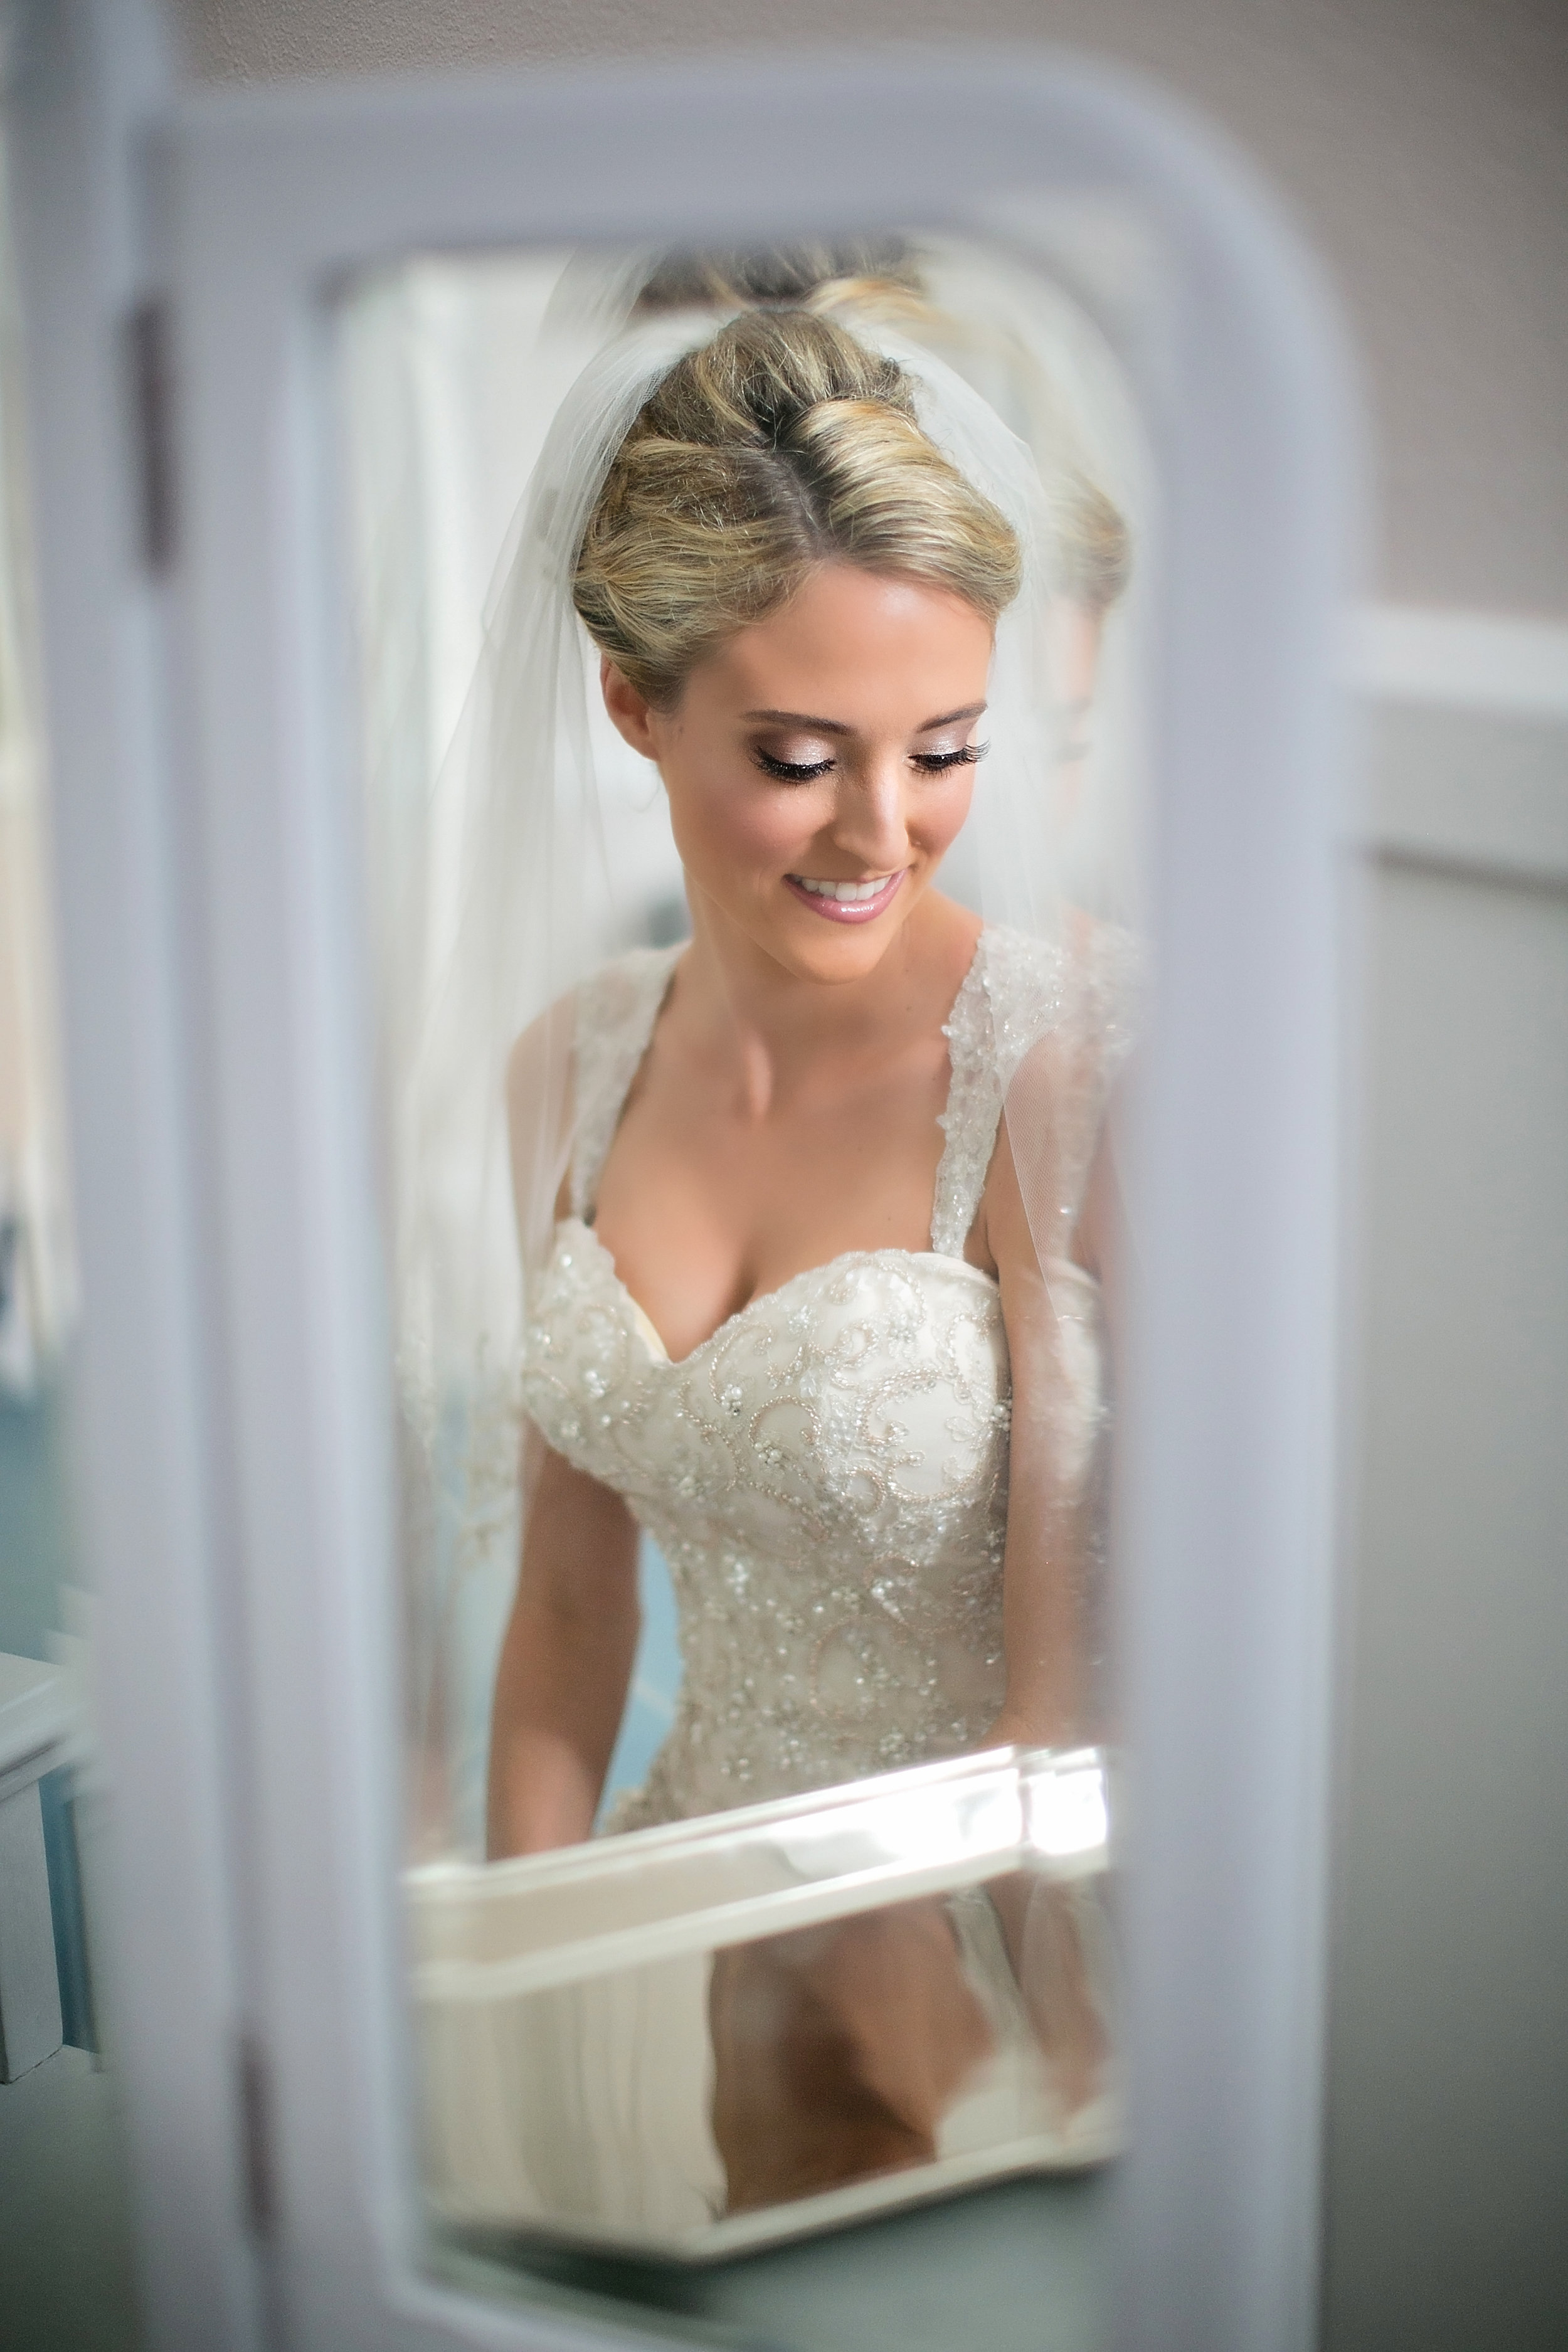   Jill is WONDERFUL at making you feel like a princess on your special wedding day!! Our wedding was in July and she made our bridesmaids look stunning on that hot summer day. She is very professional and gives great beauty advice for all the makeup 